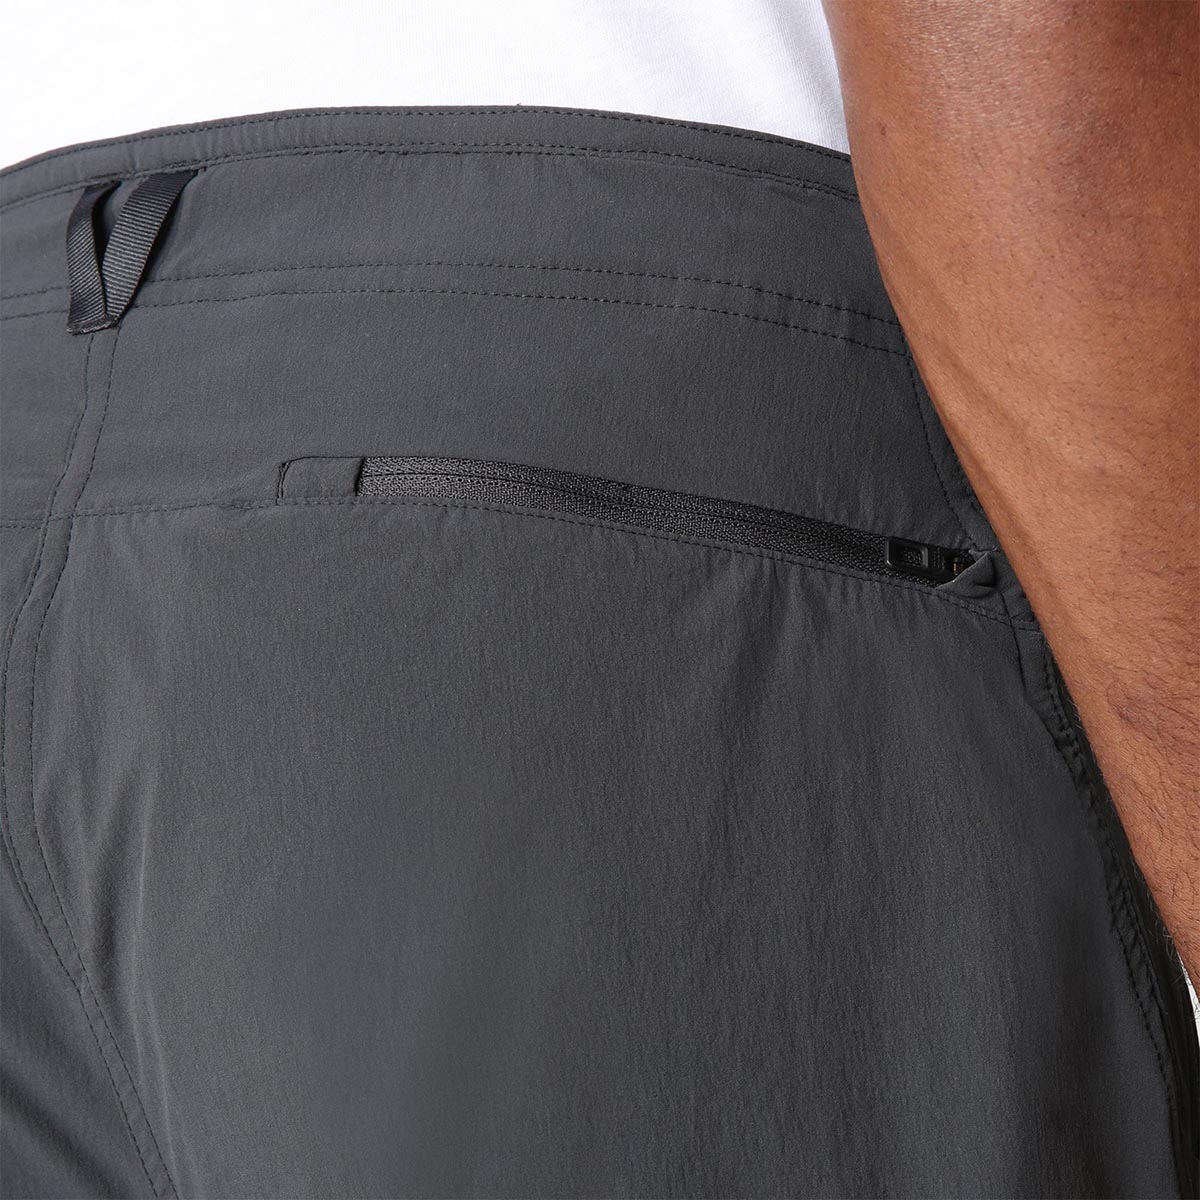 THE NORTH FACE - SPEEDLIGHT SLIM TAPERED SHORTS